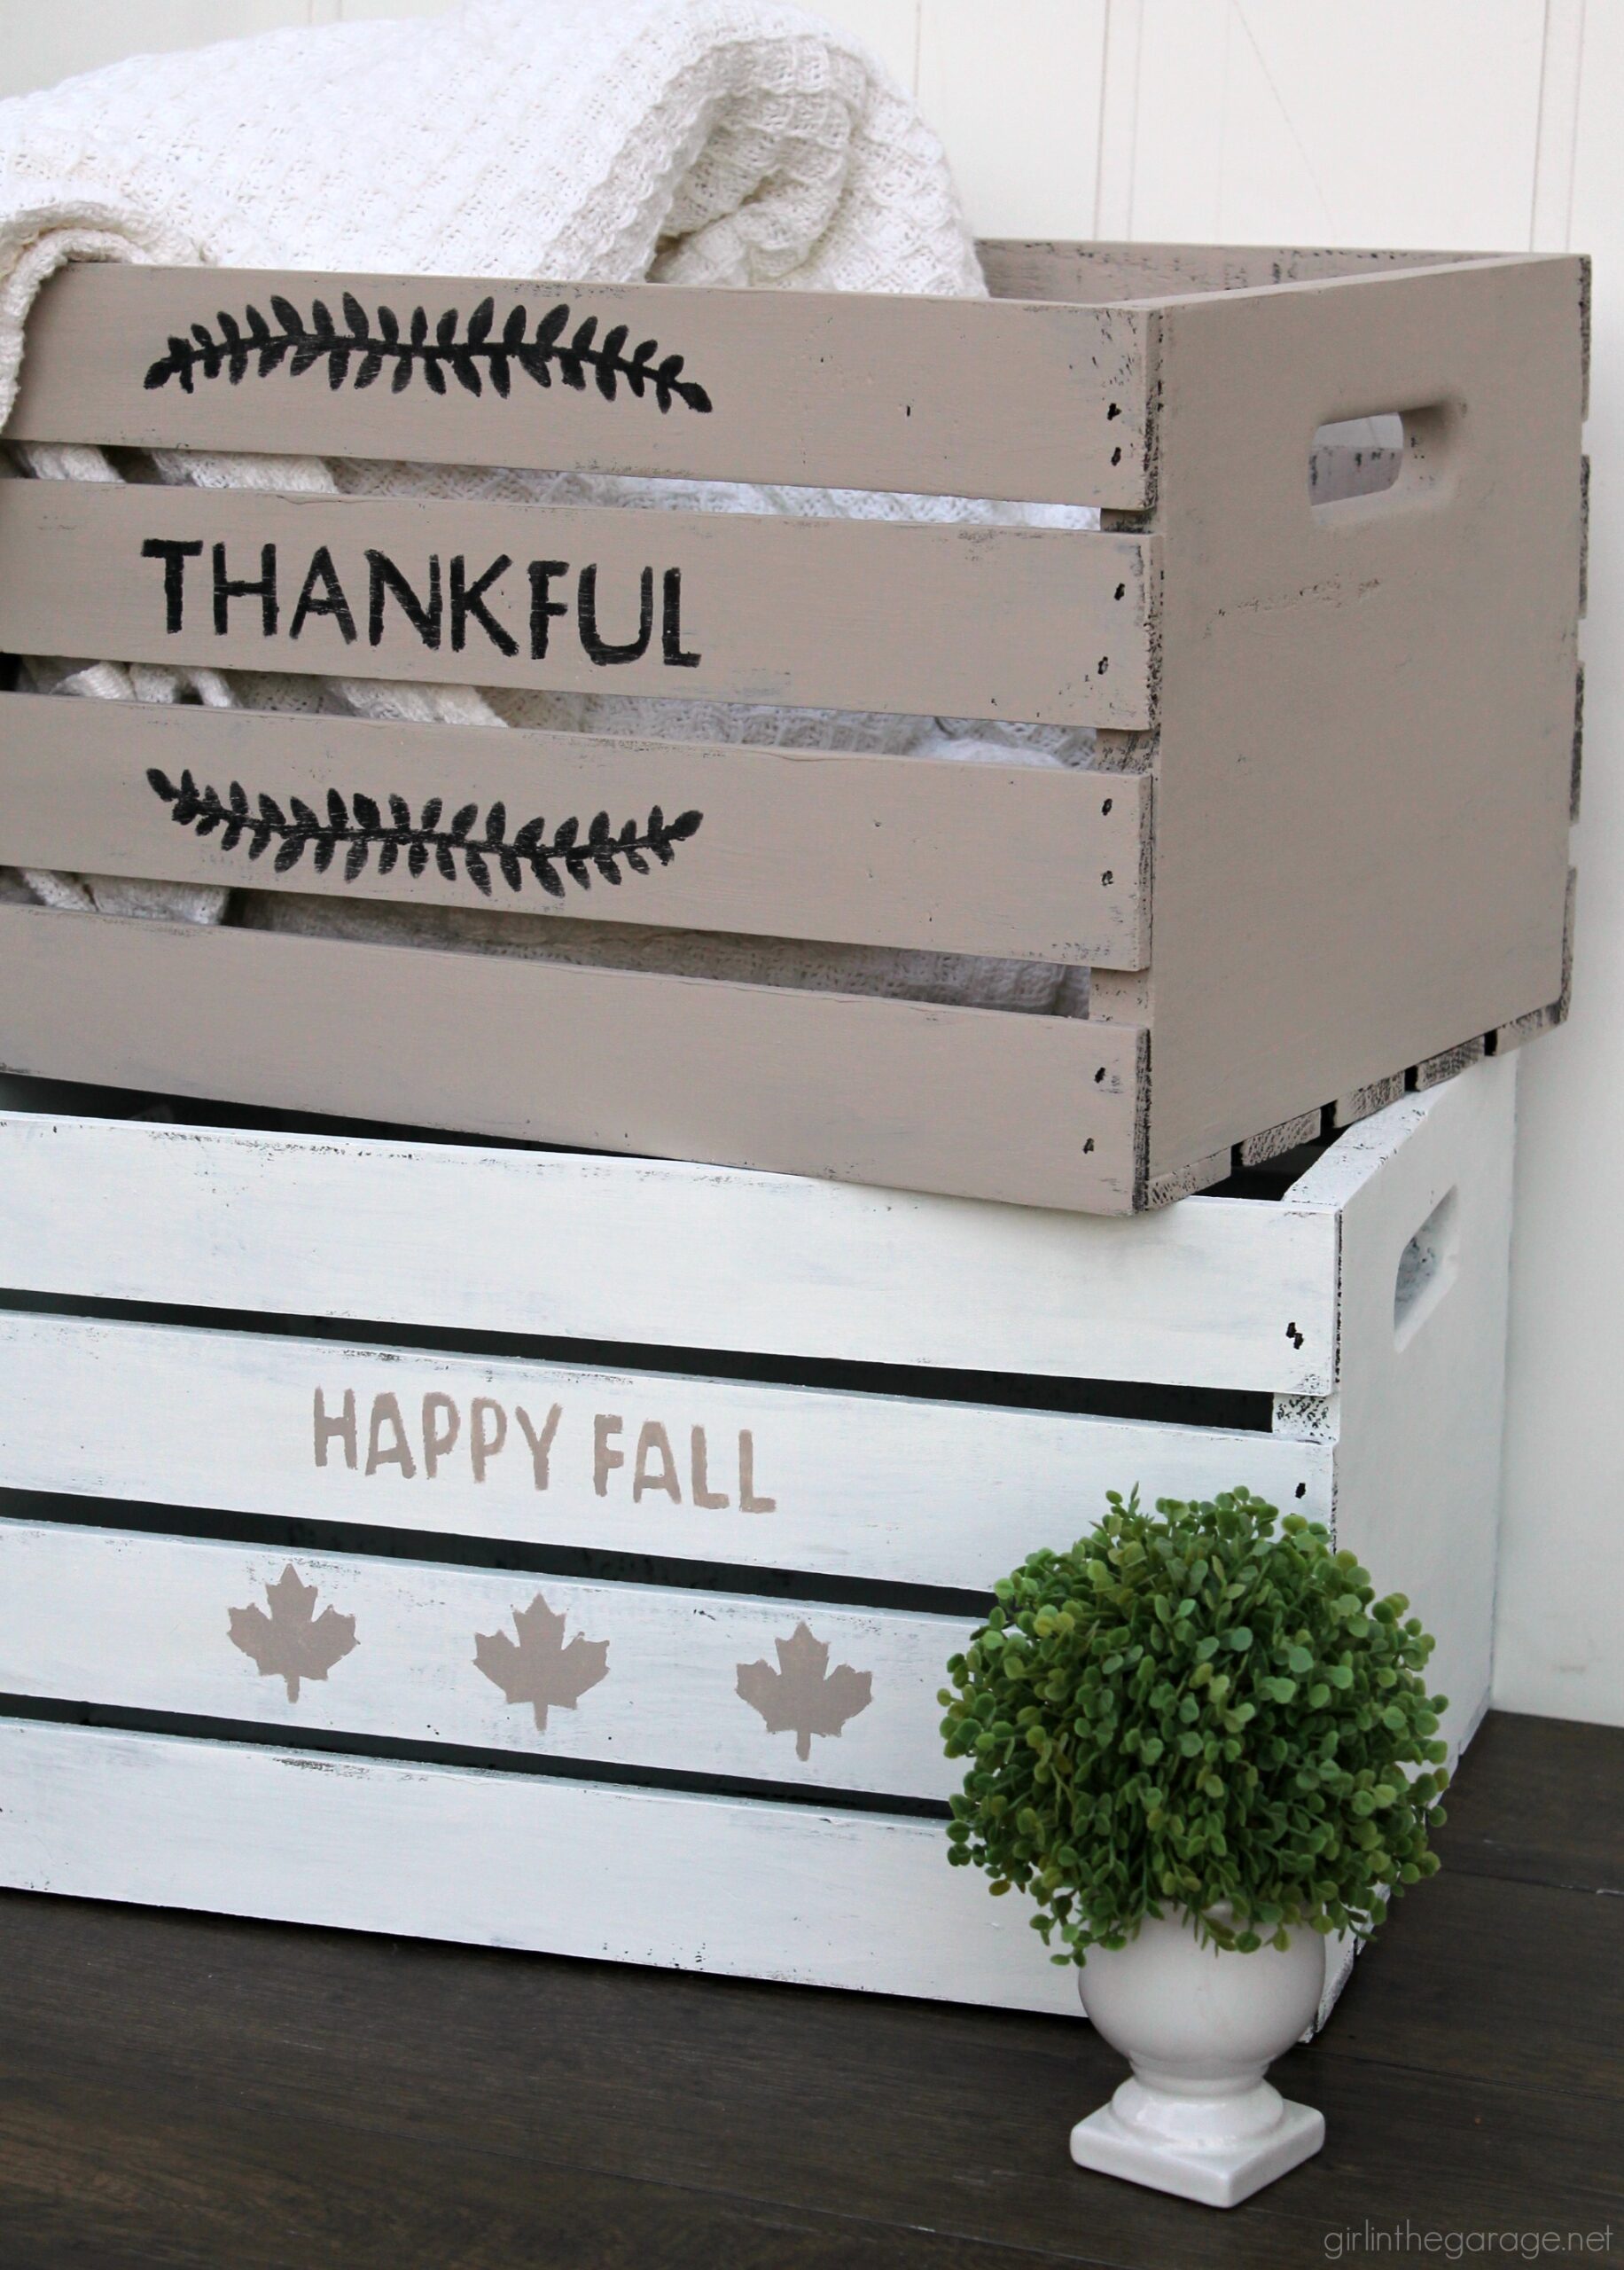 How to paint holiday crates - Learn how to stencil wooden crates for both fall and Christmas decor. Step by step tutorial by Girl in the Garage.